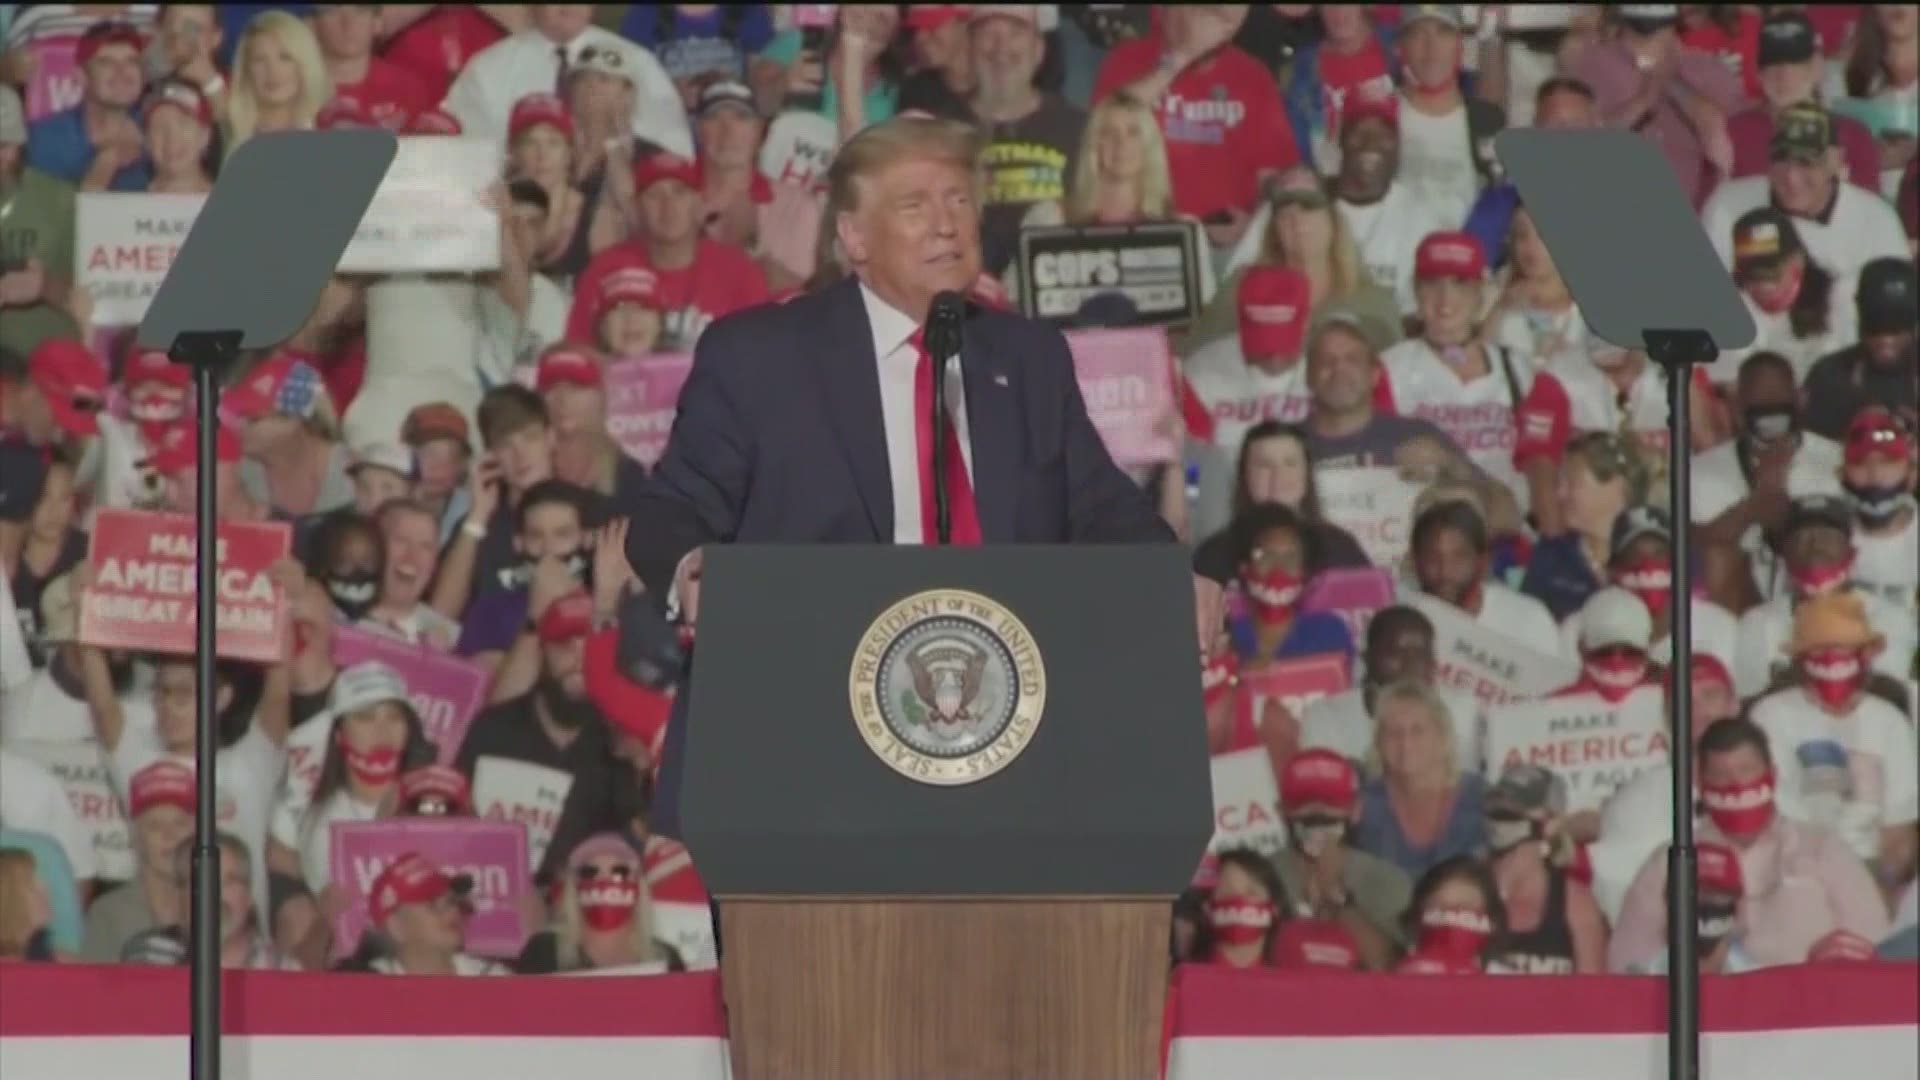 President Trump was back on the campaign trail for the first time since testing positive for COVID-19.